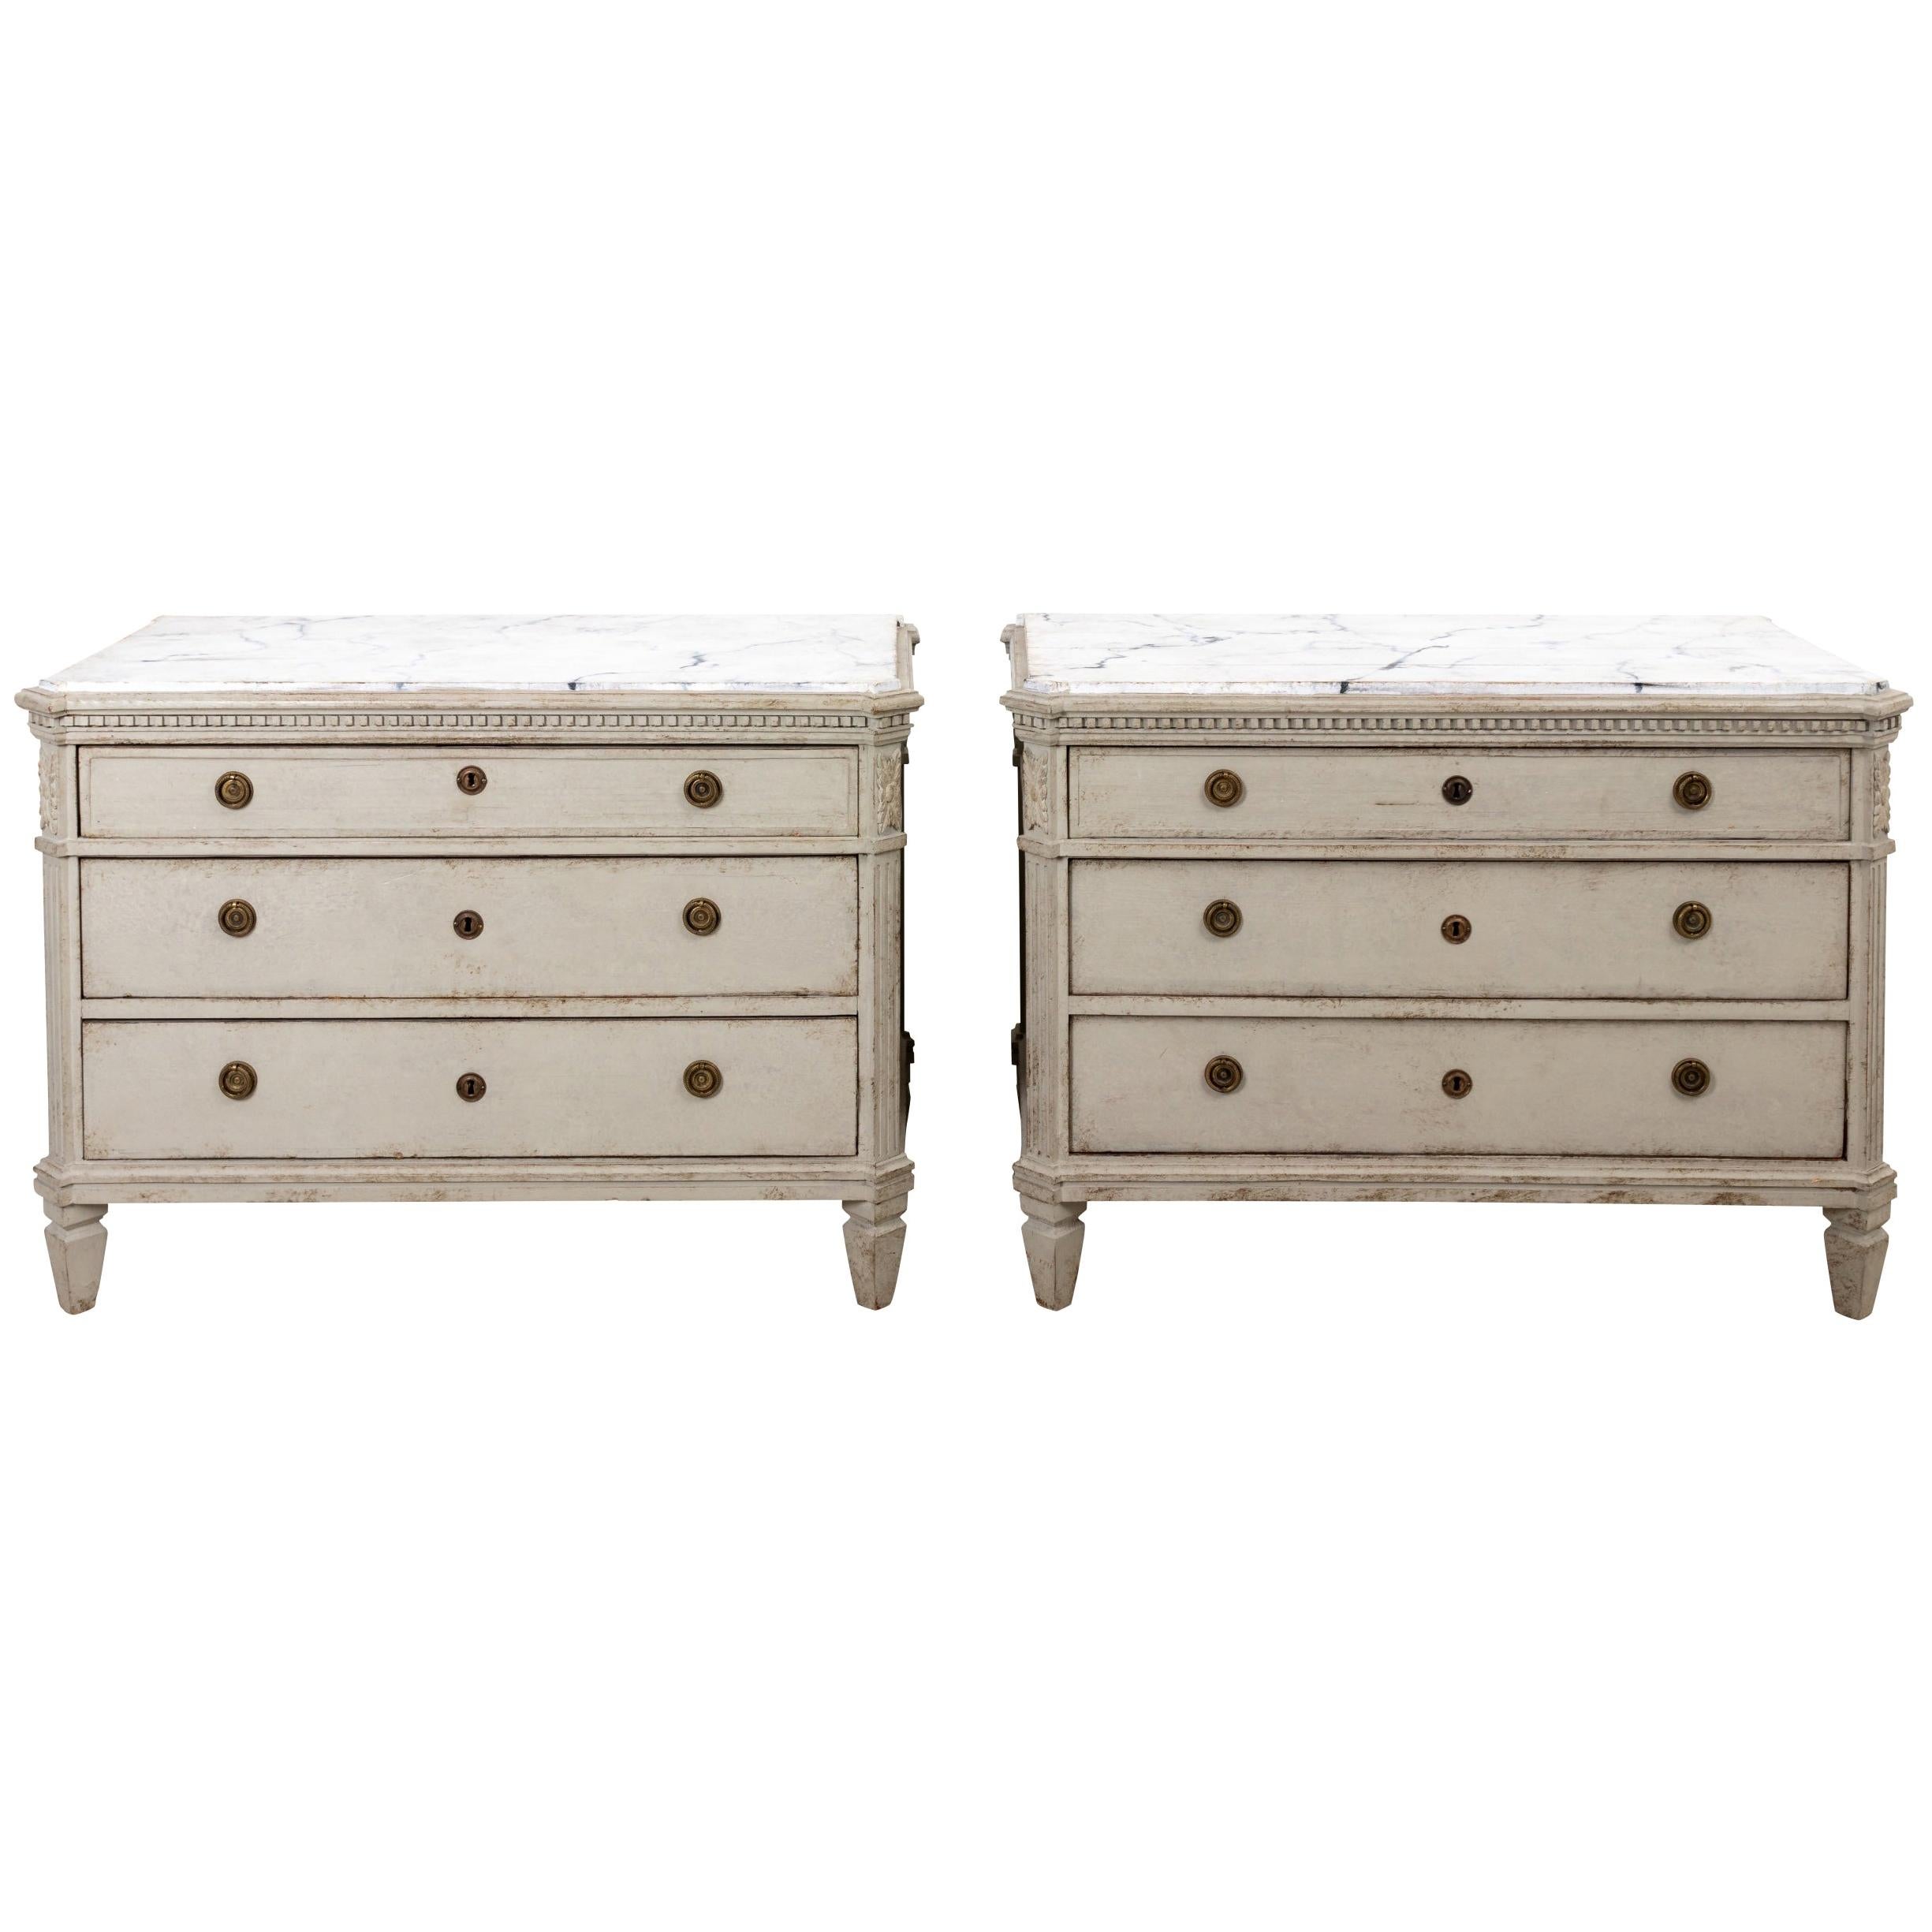 Pair of Painted Gustavian Chest of Drawers